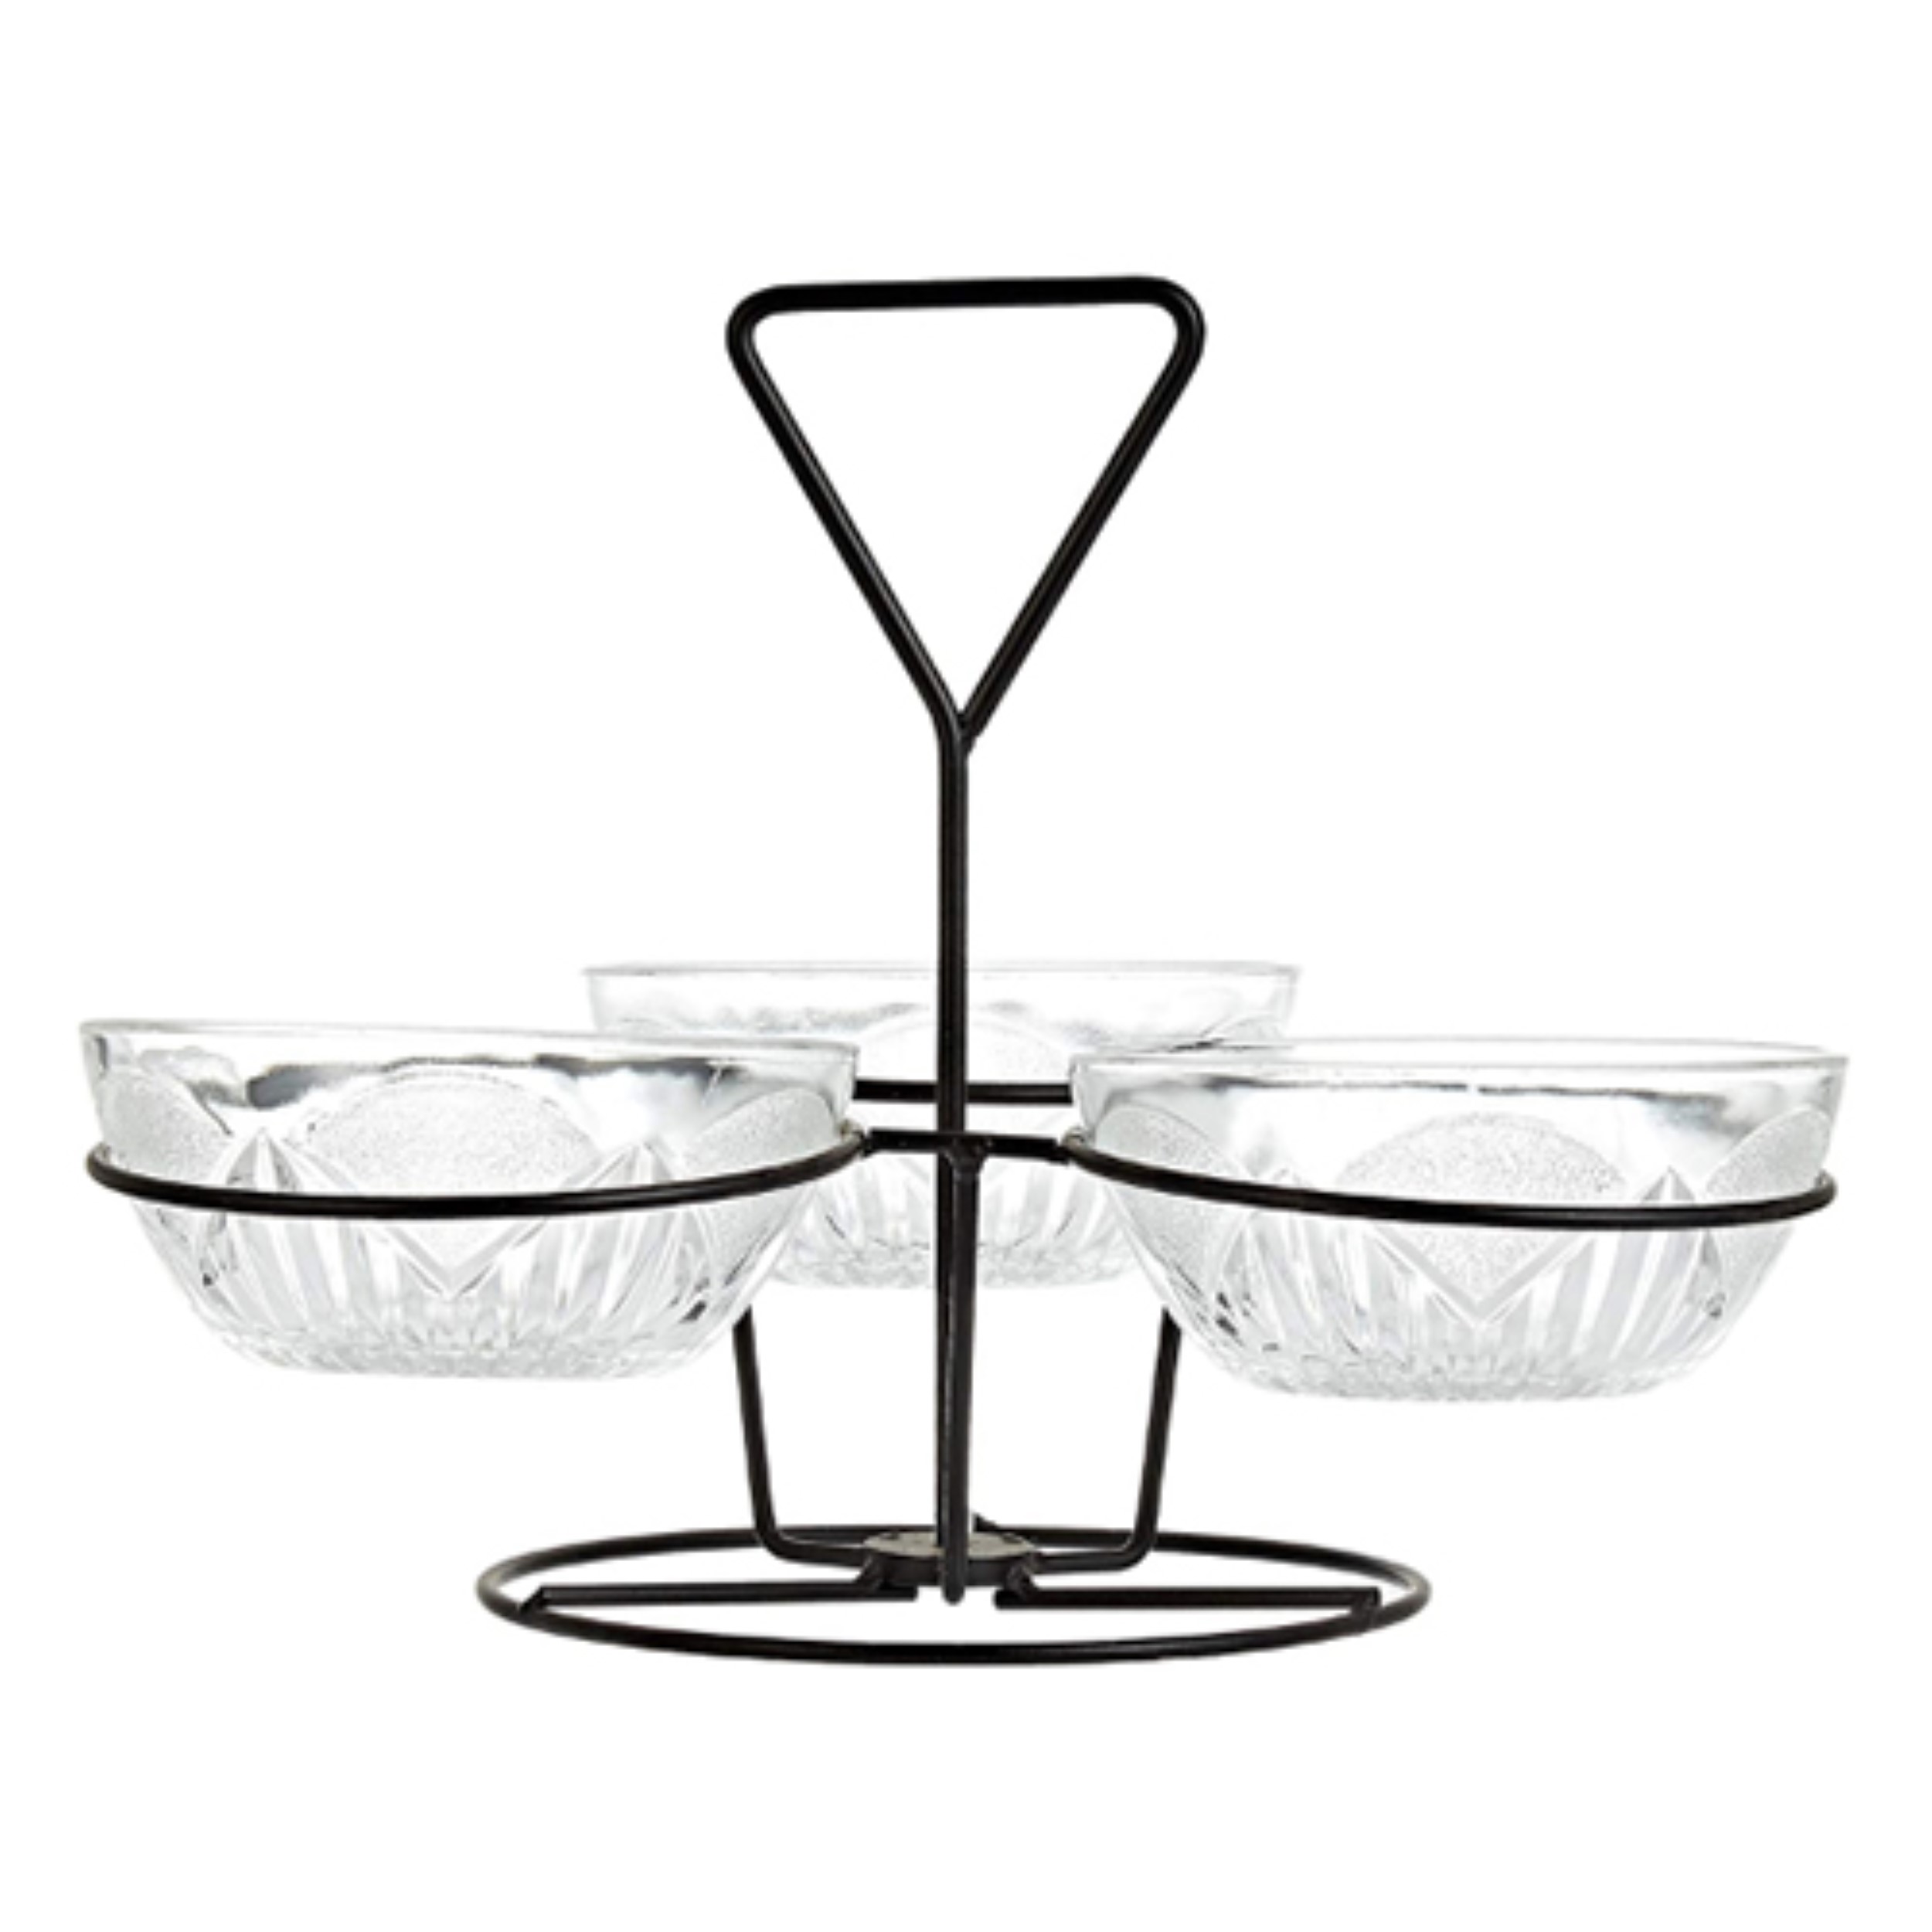 Harmony Serving Bowl Set With Stand Clear 4 Piece